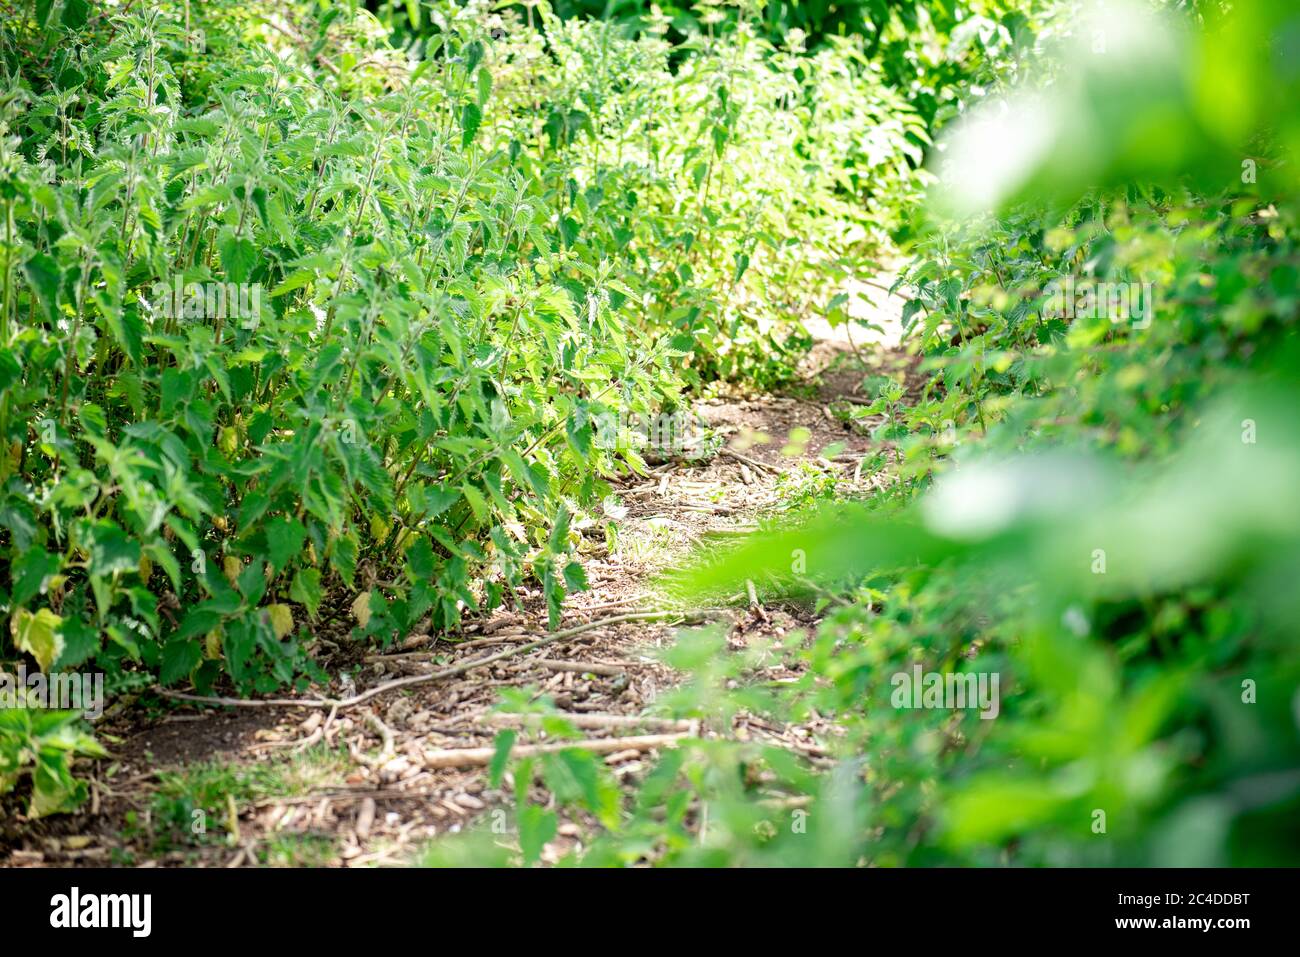 Bed of nettles in a country park Stock Photo